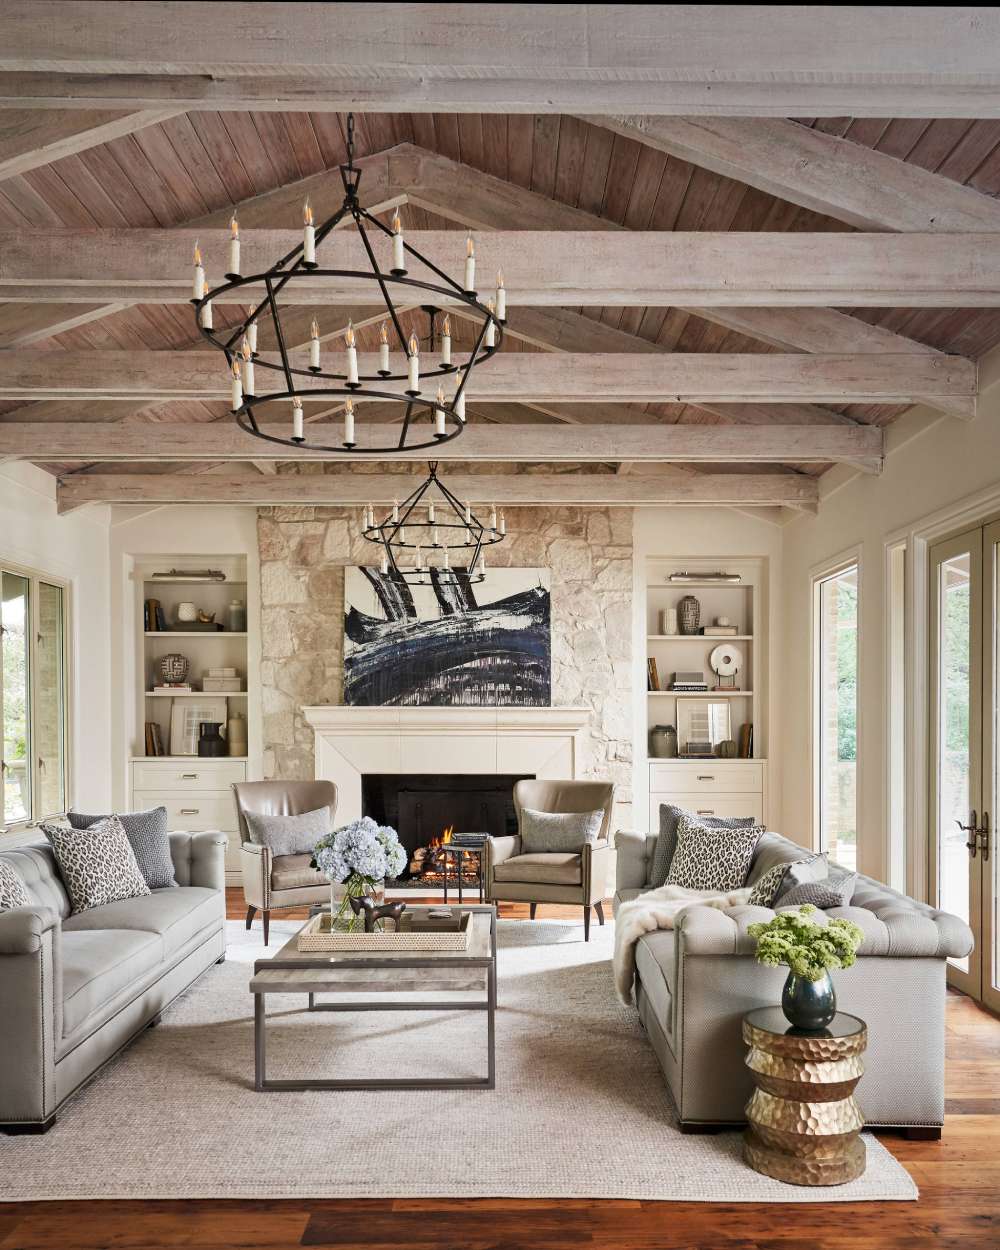 1-25-2 How to Decorate a Living Room with Vaulted Ceilings